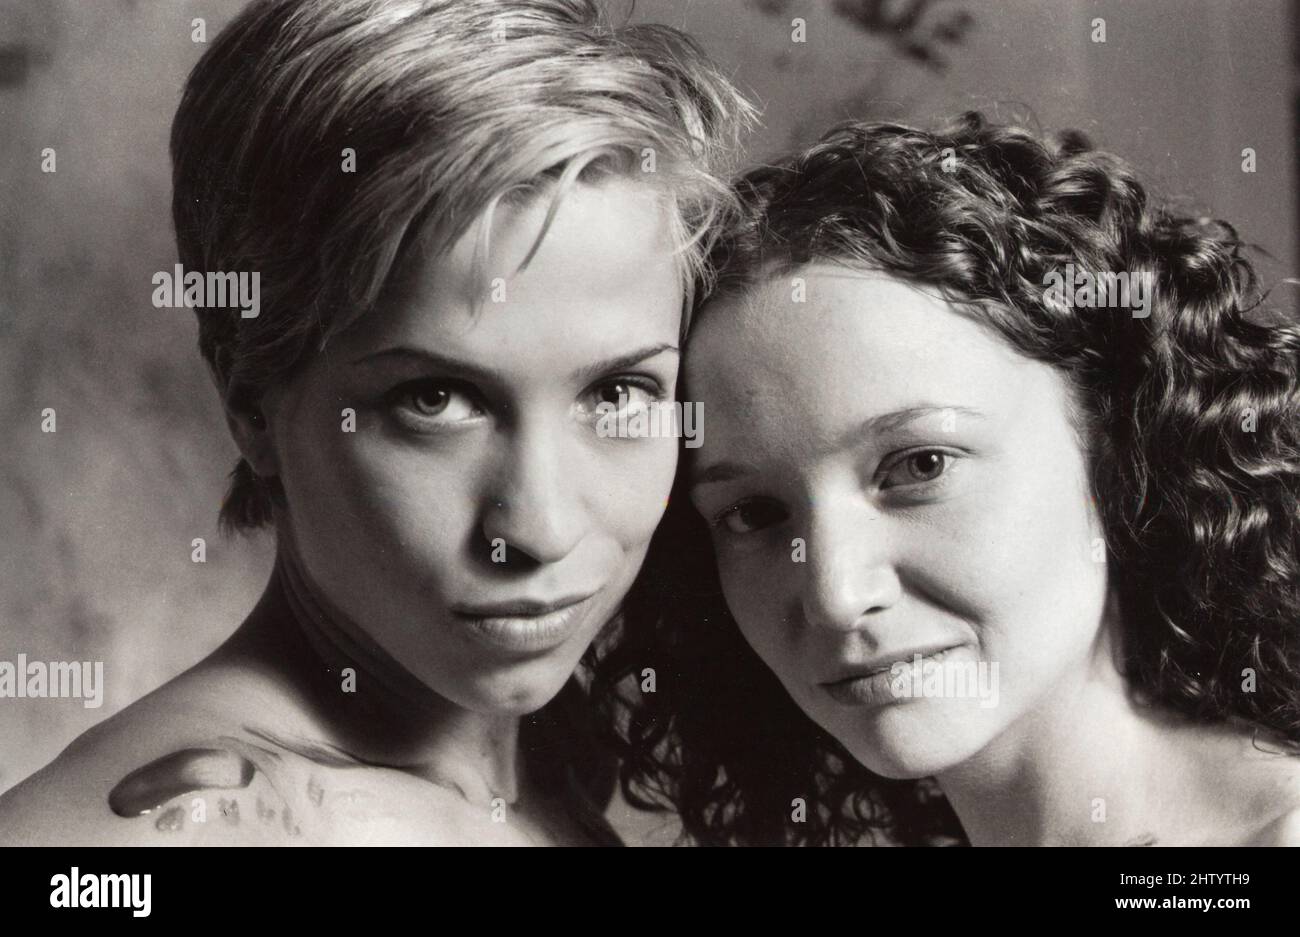 Actresses Christina Cox and Karyn Dwyer in the movie Better Than Chocolate, Canada 1999 Stock Photo